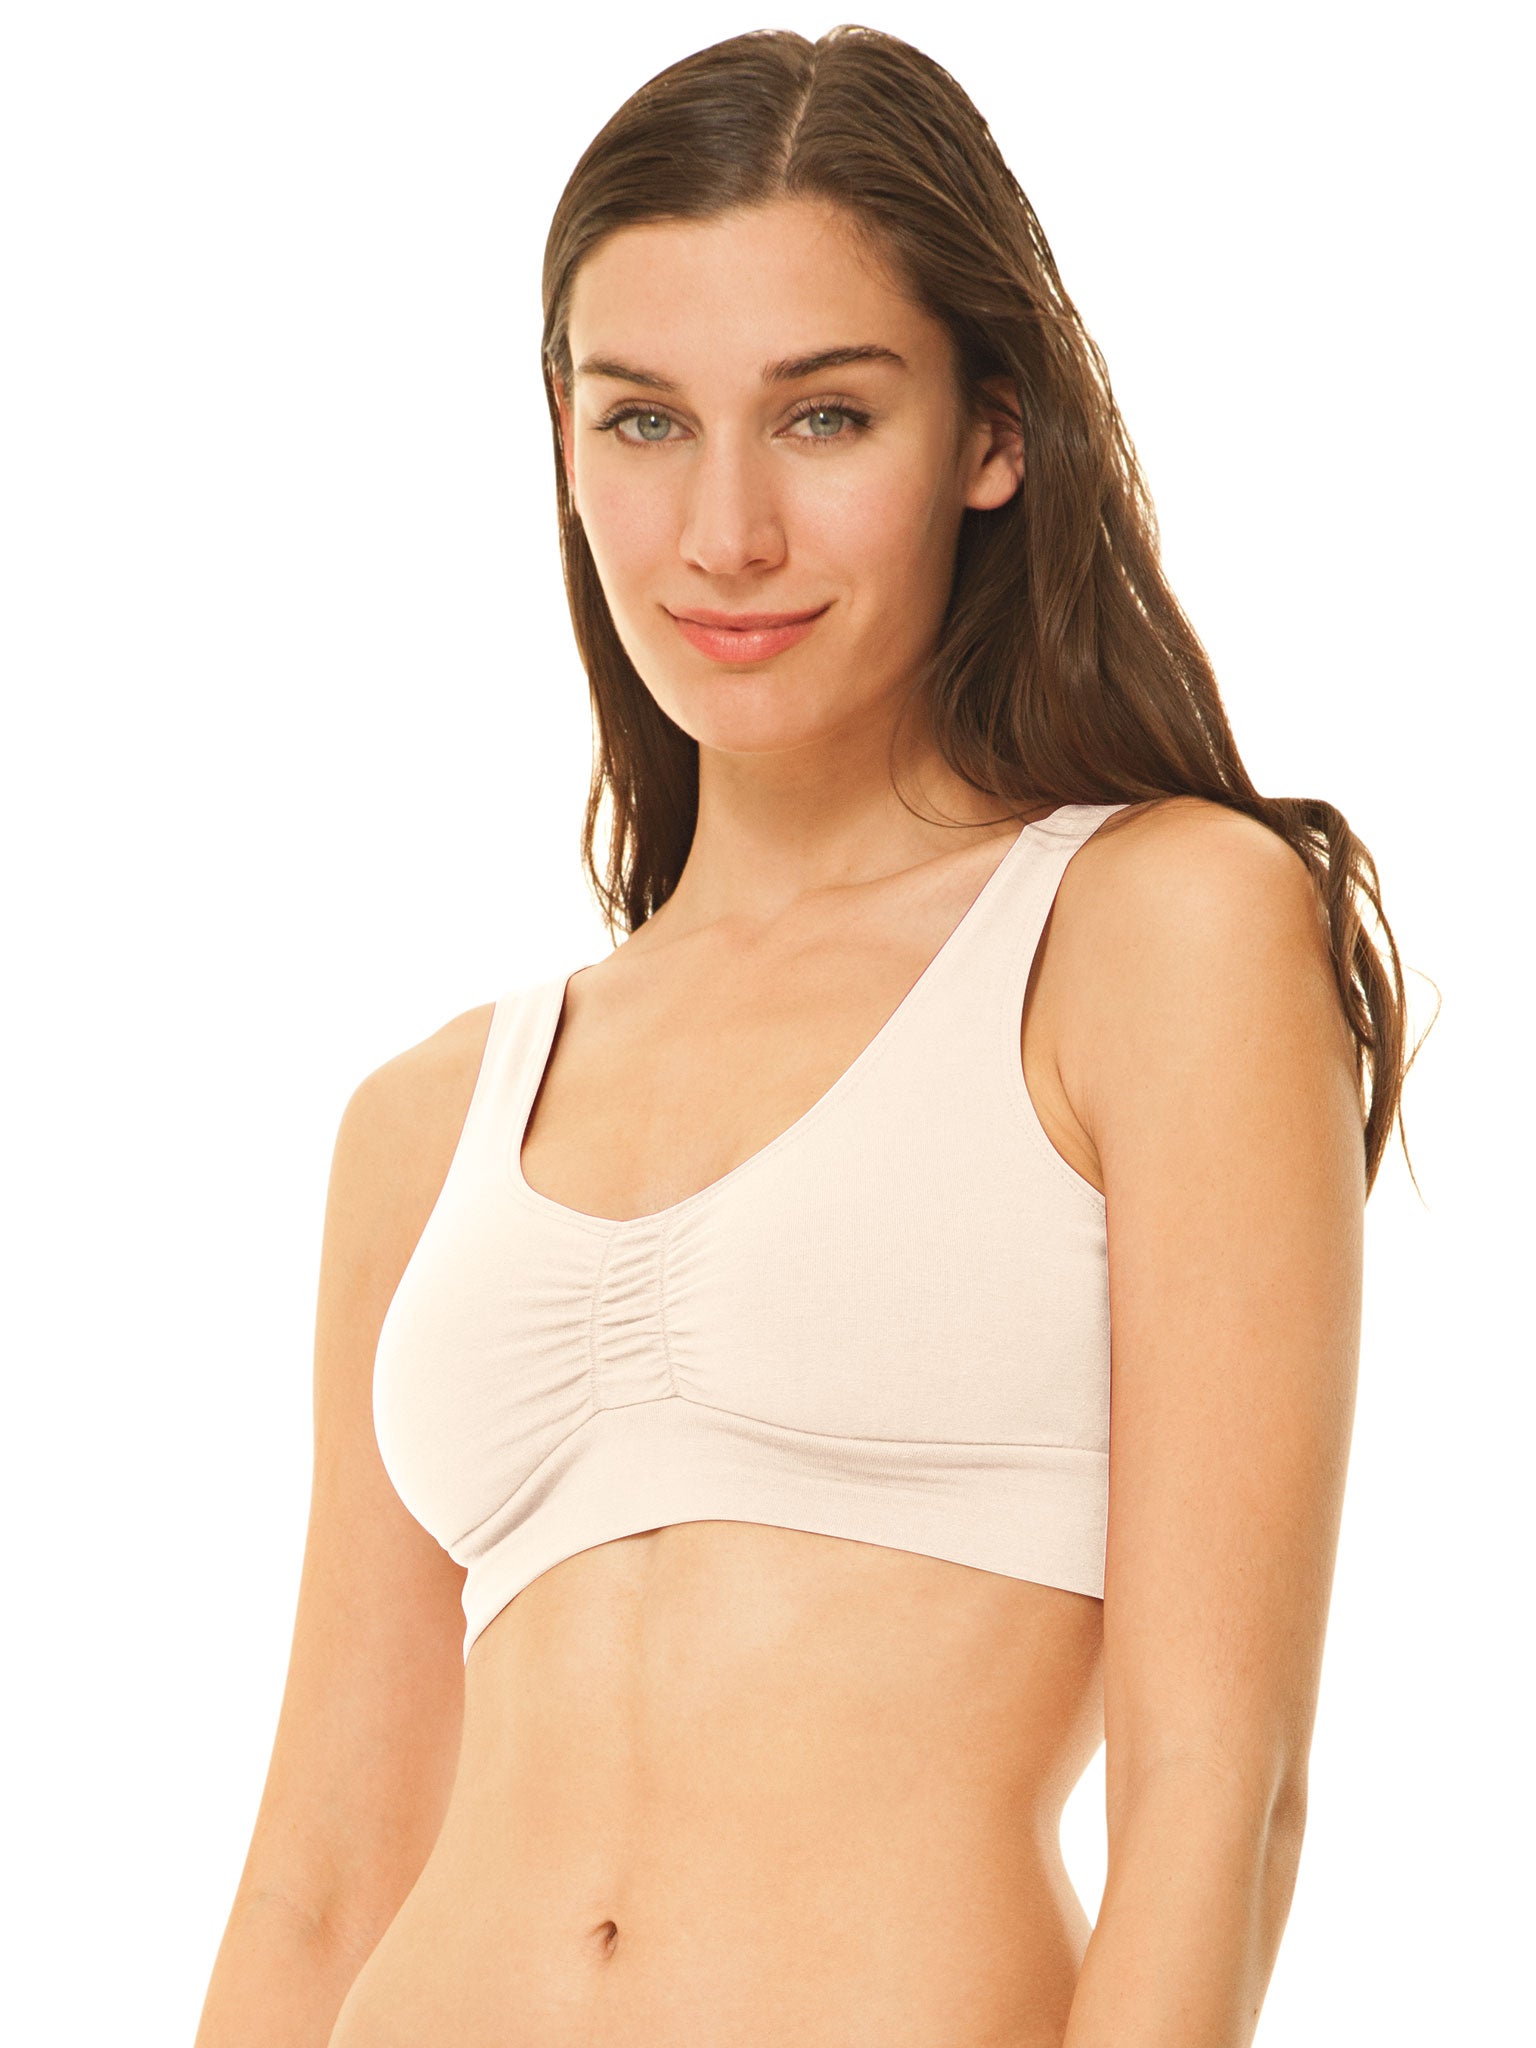 Best Bra Size 38l for sale in Nashville, Tennessee for 2023